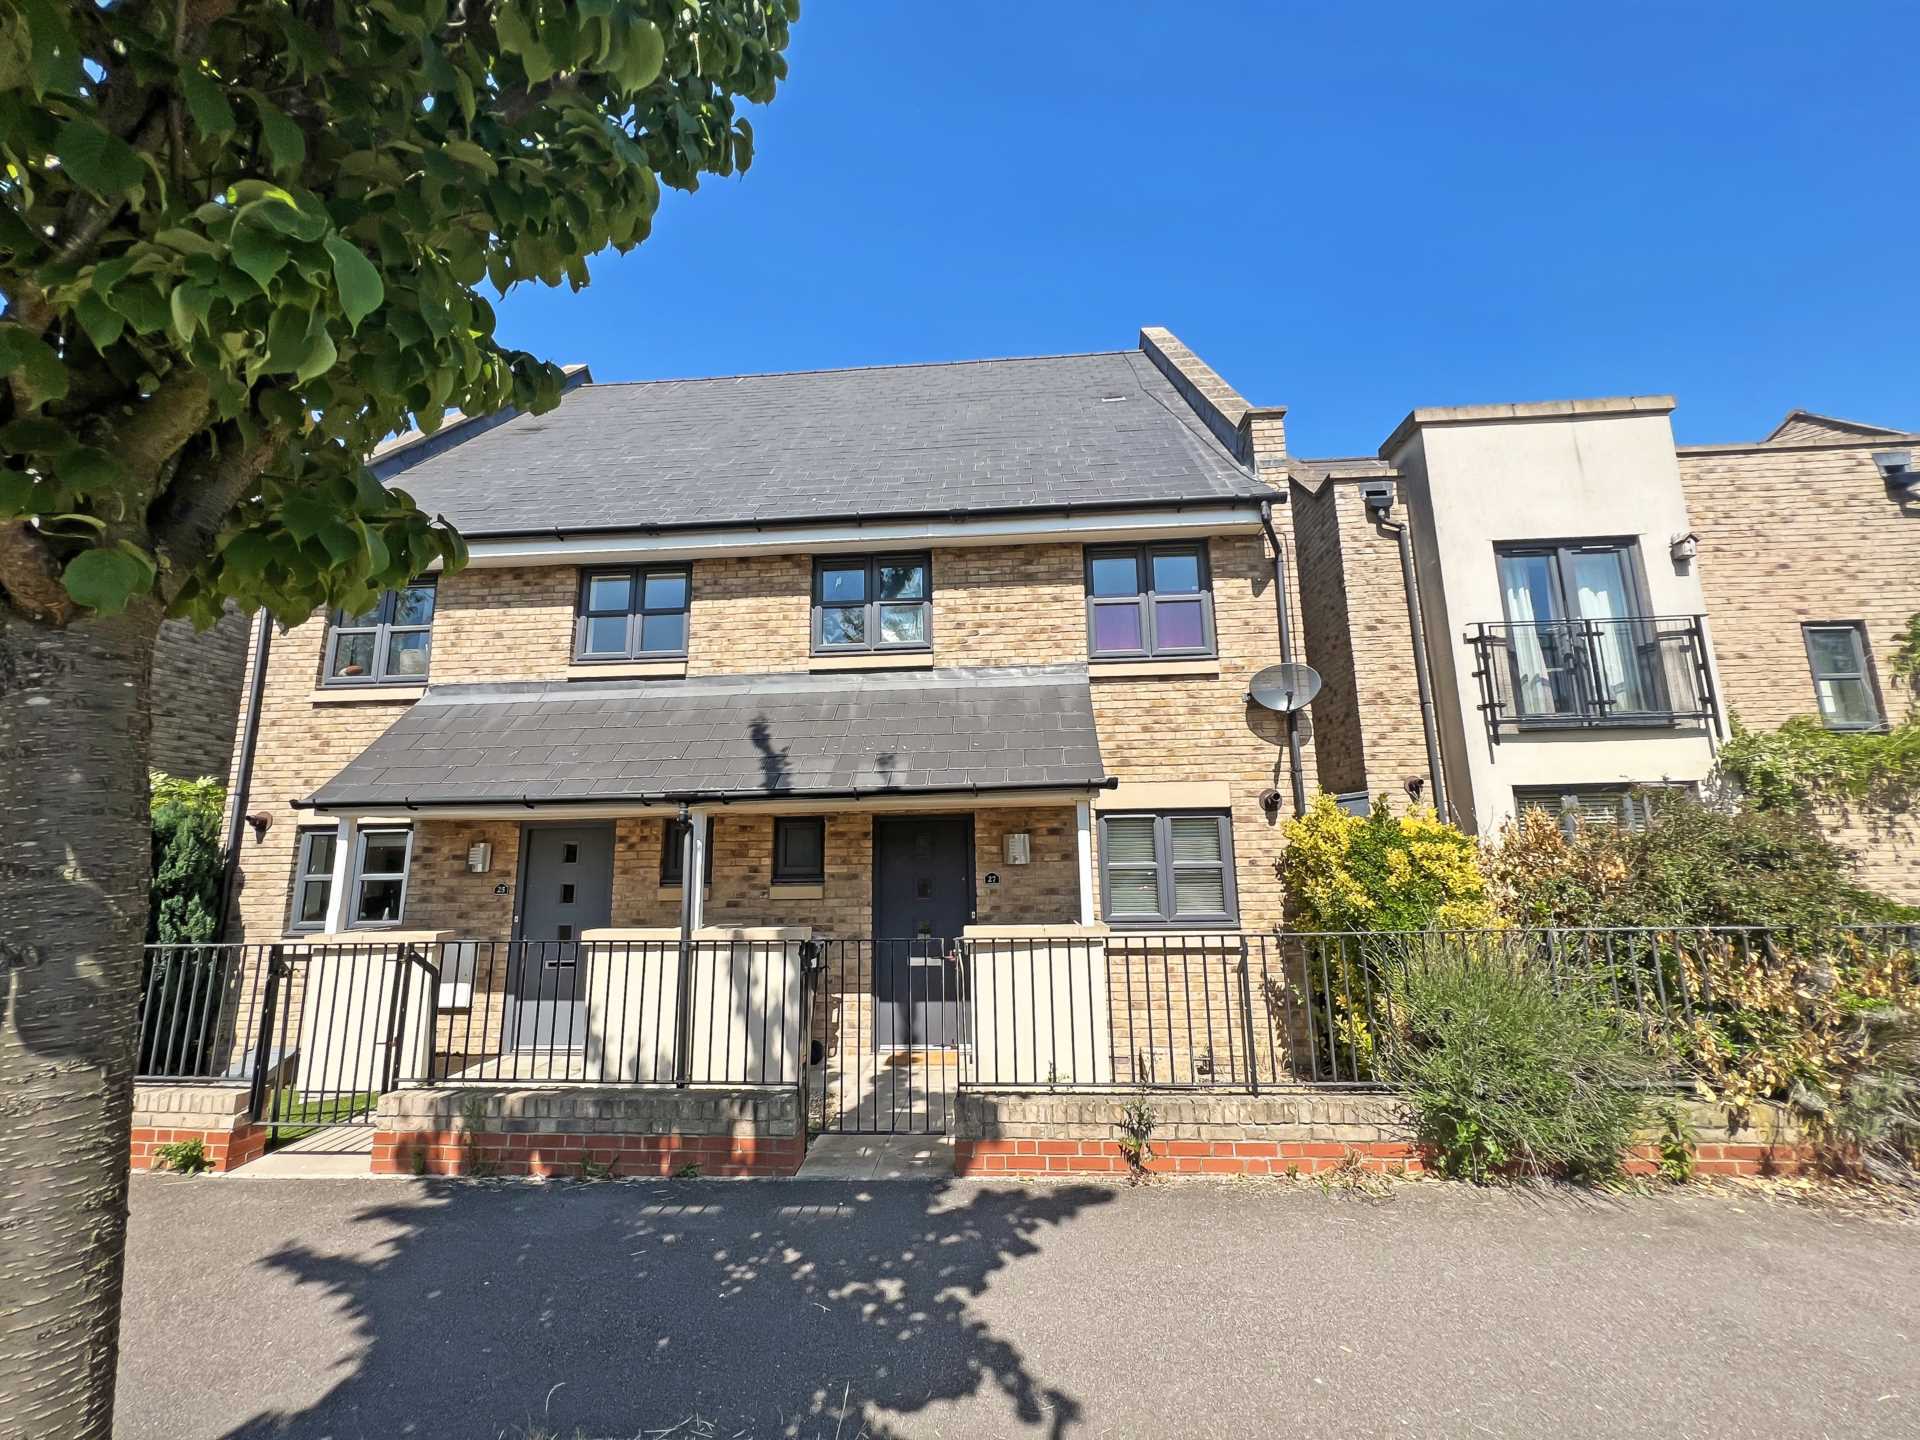 3 bed Semi-Detached House for rent in St Neots. From Noonan Crane Property Management